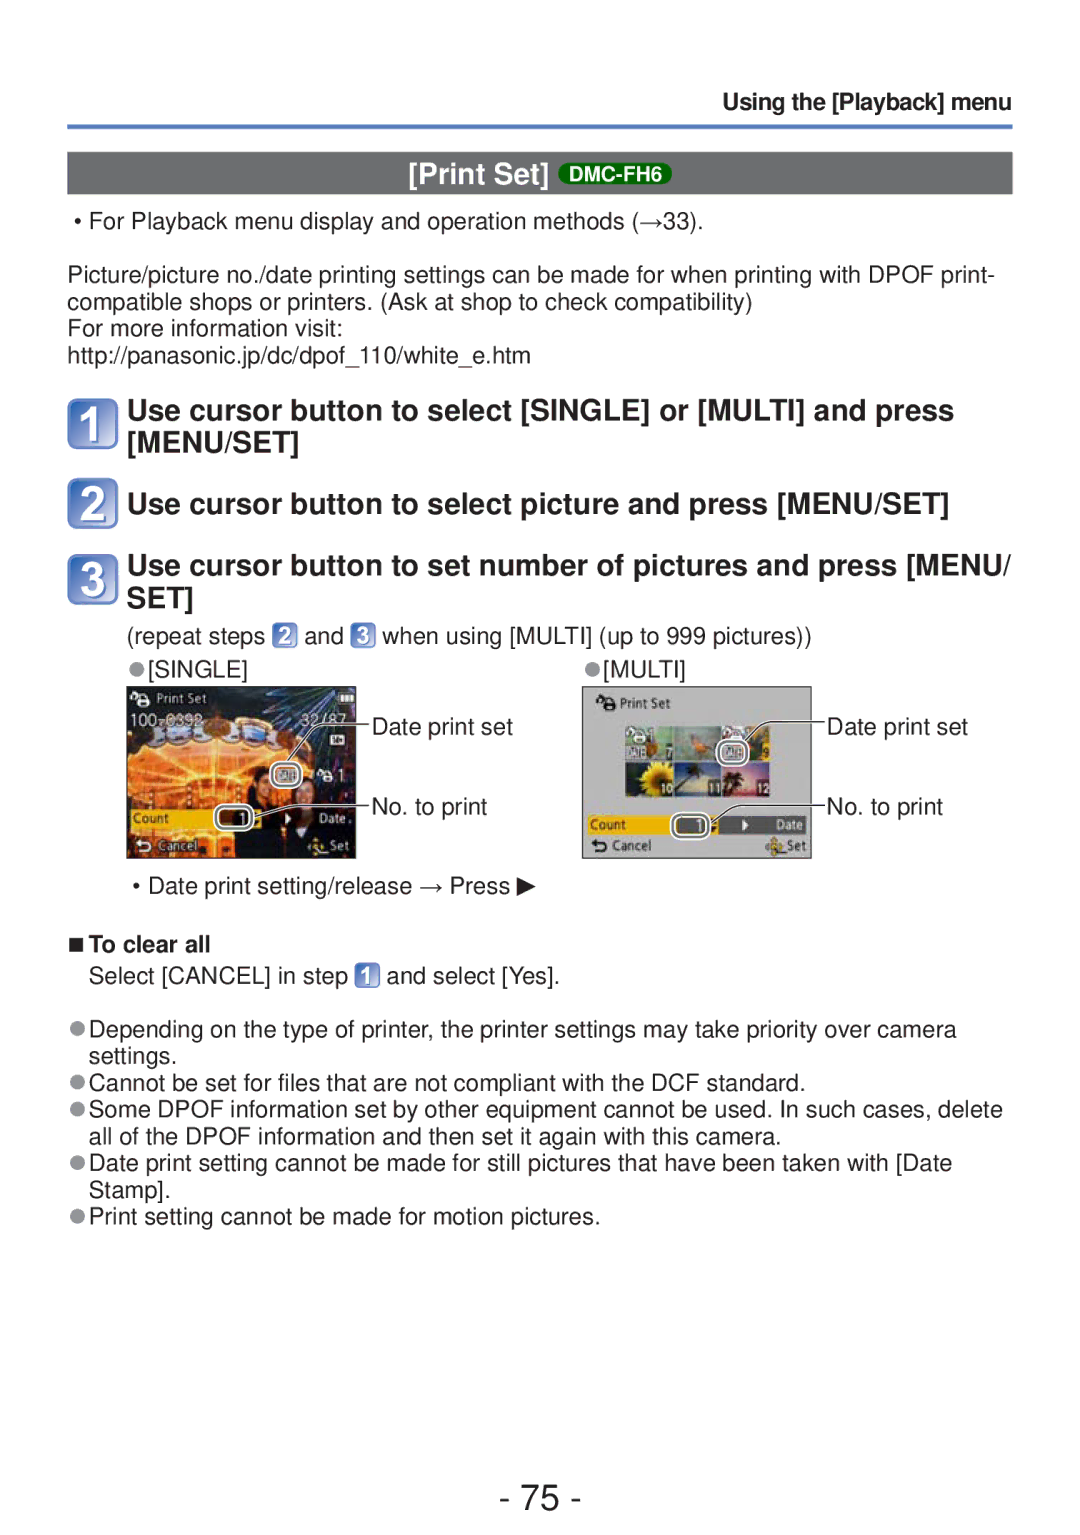 Panasonic DMC-S5, DMC-FH4 owner manual Print Set DMC-FH6, Repeat steps and when using Multi up to 999 pictures 